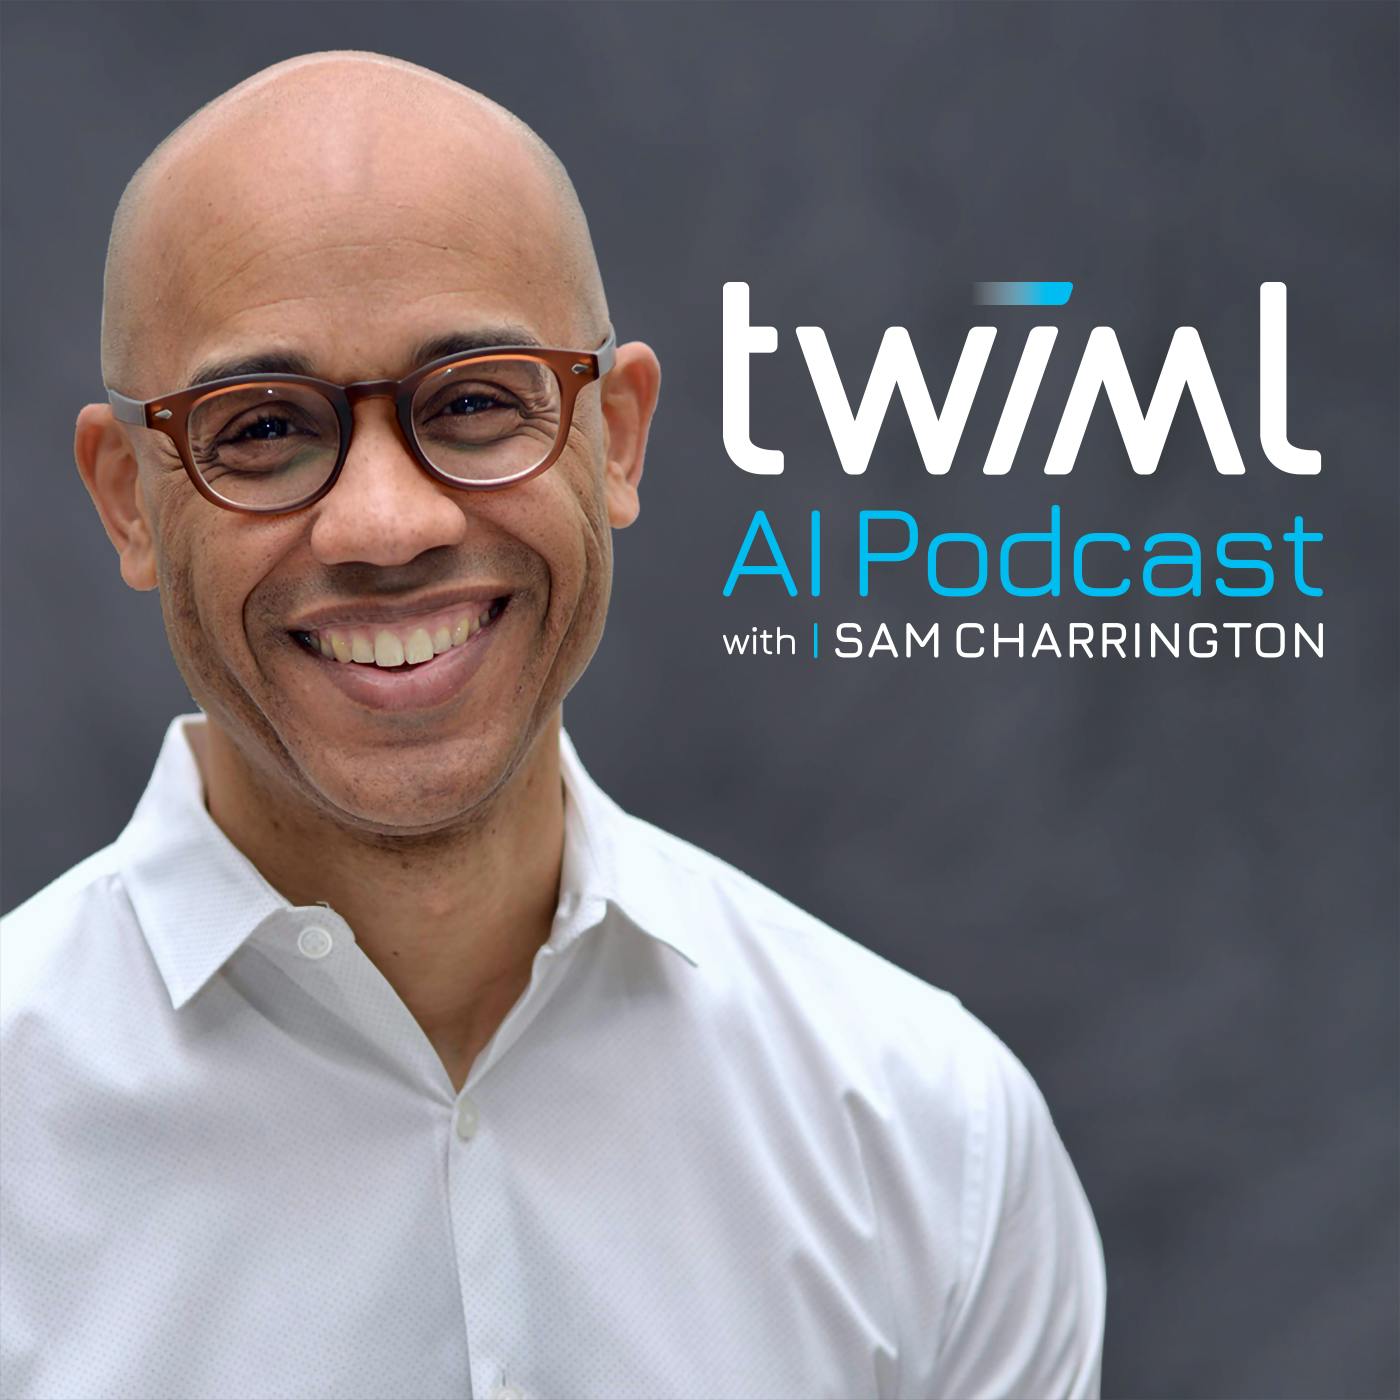 The TWIML AI Podcast (formerly This Week in Machine Learning & Artificial Intelligence) podcast